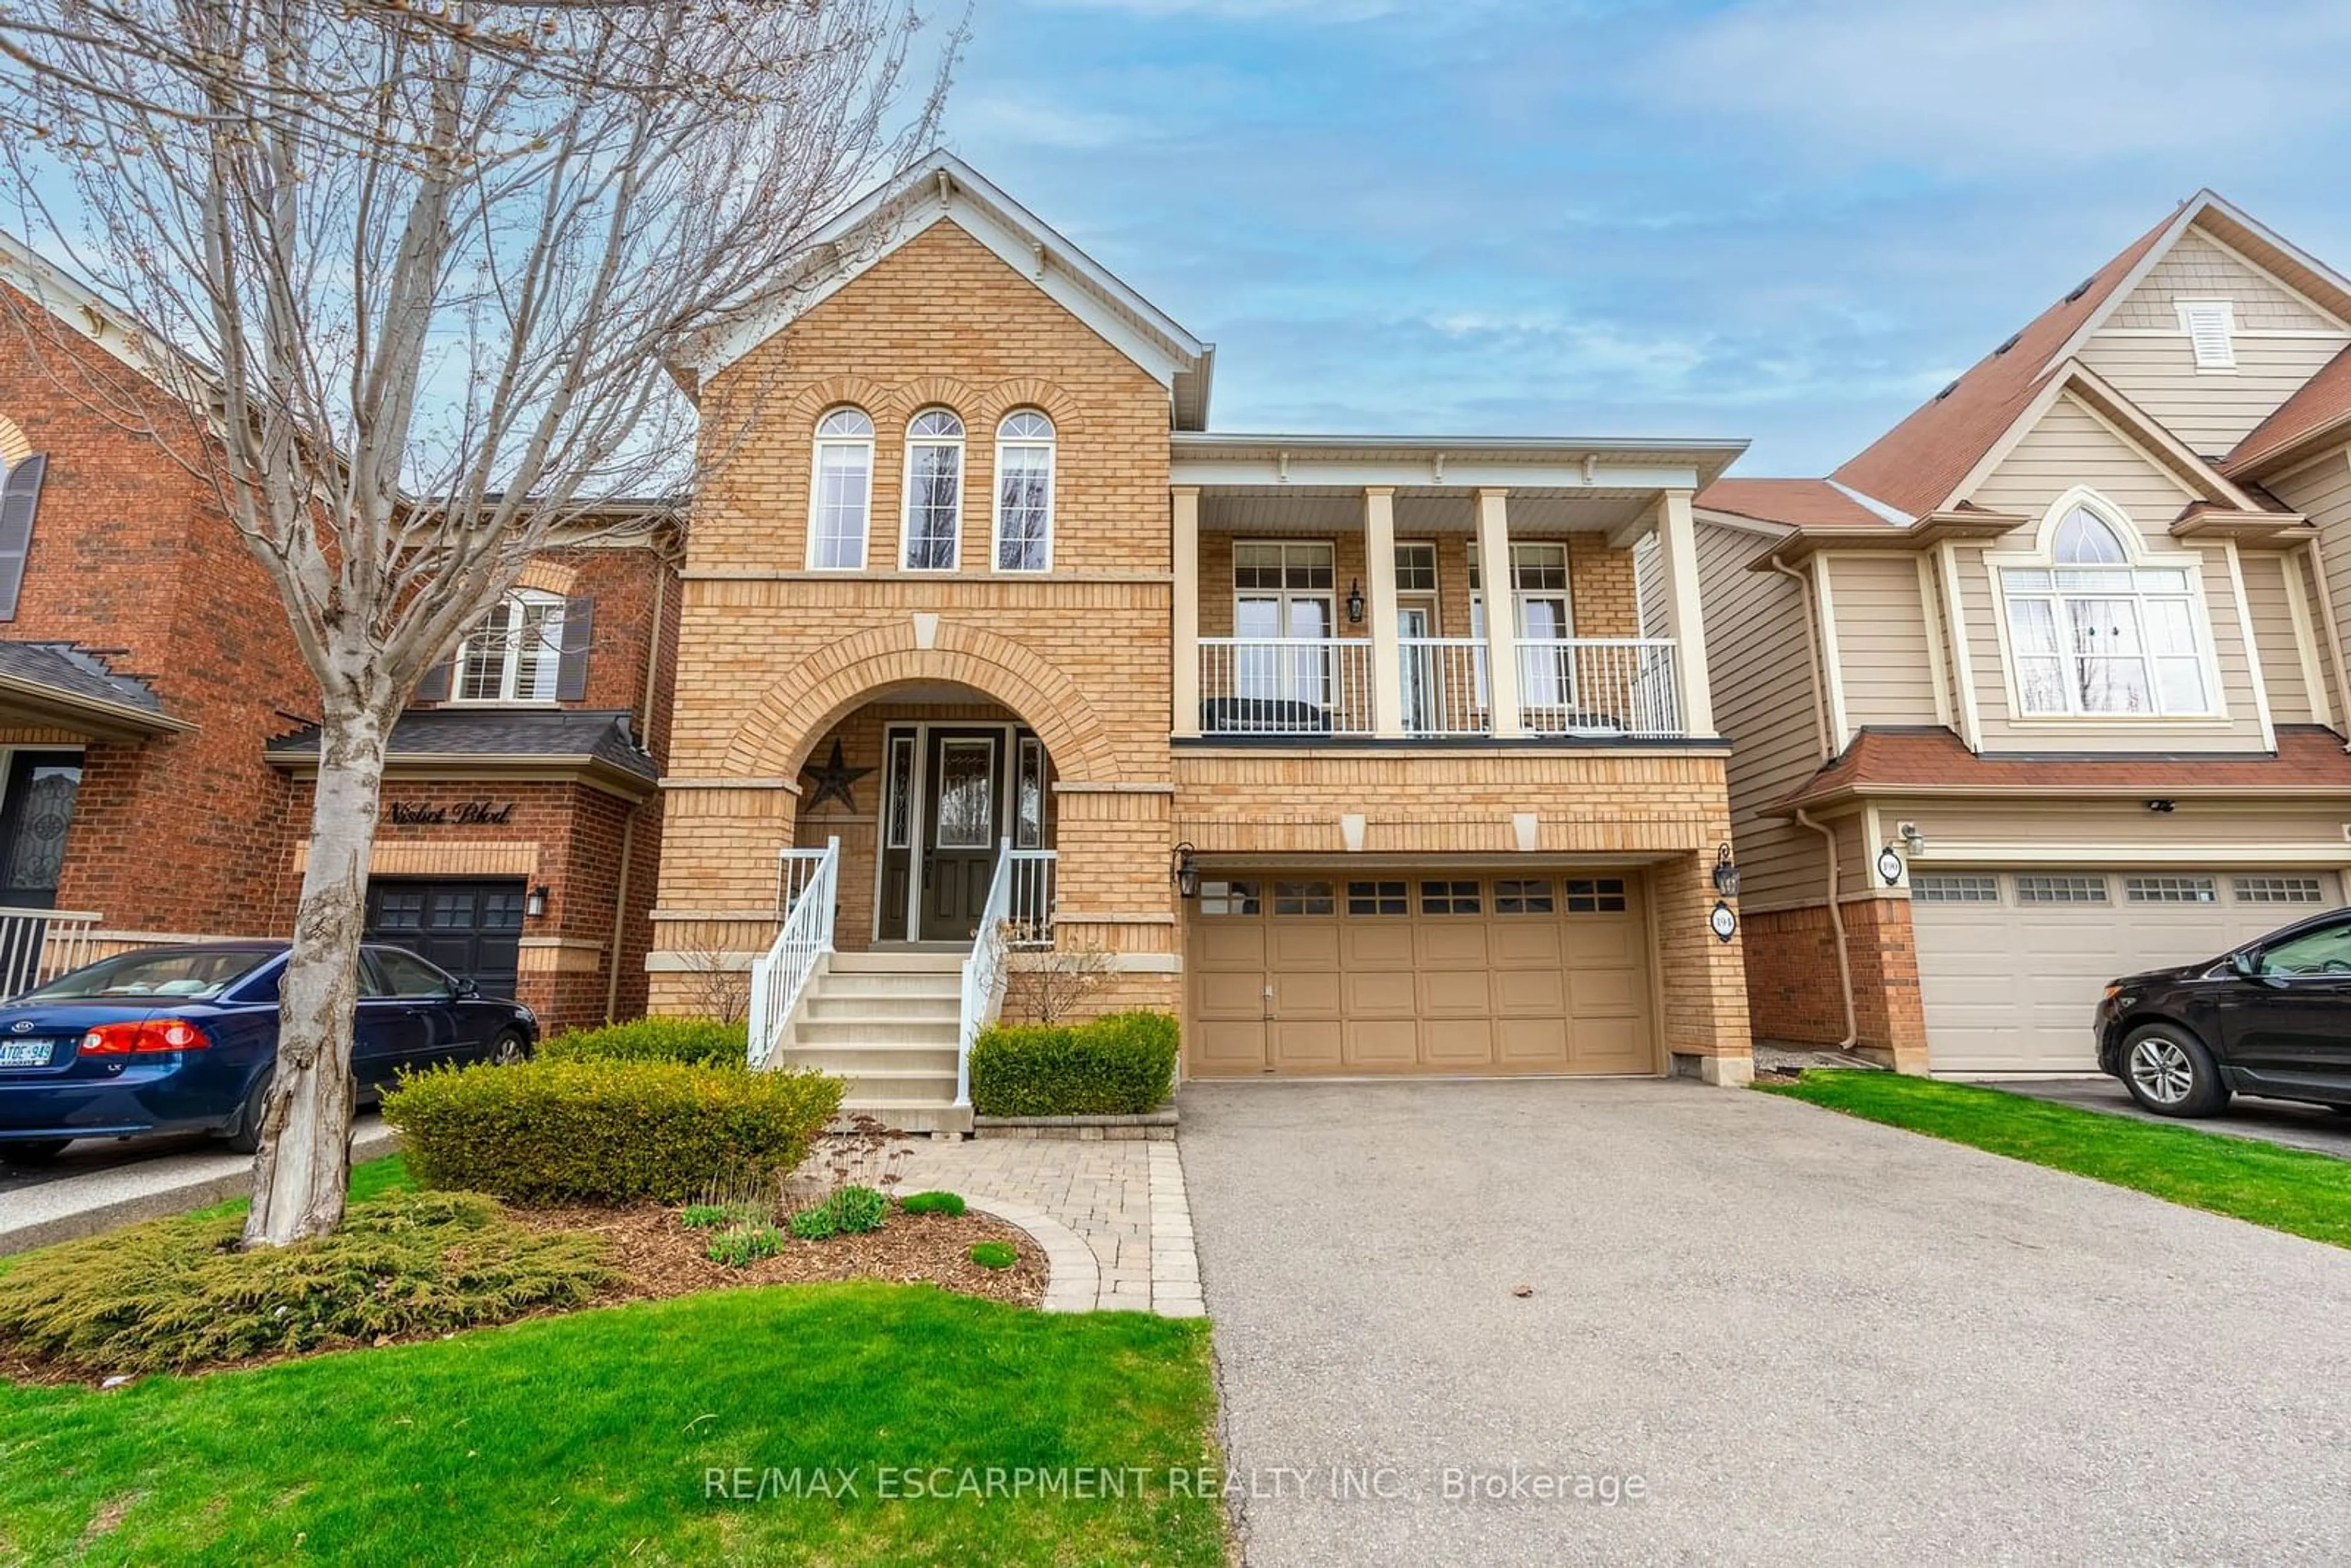 Home with brick exterior material for 194 Nisbet Blvd, Hamilton Ontario L8B 0S7